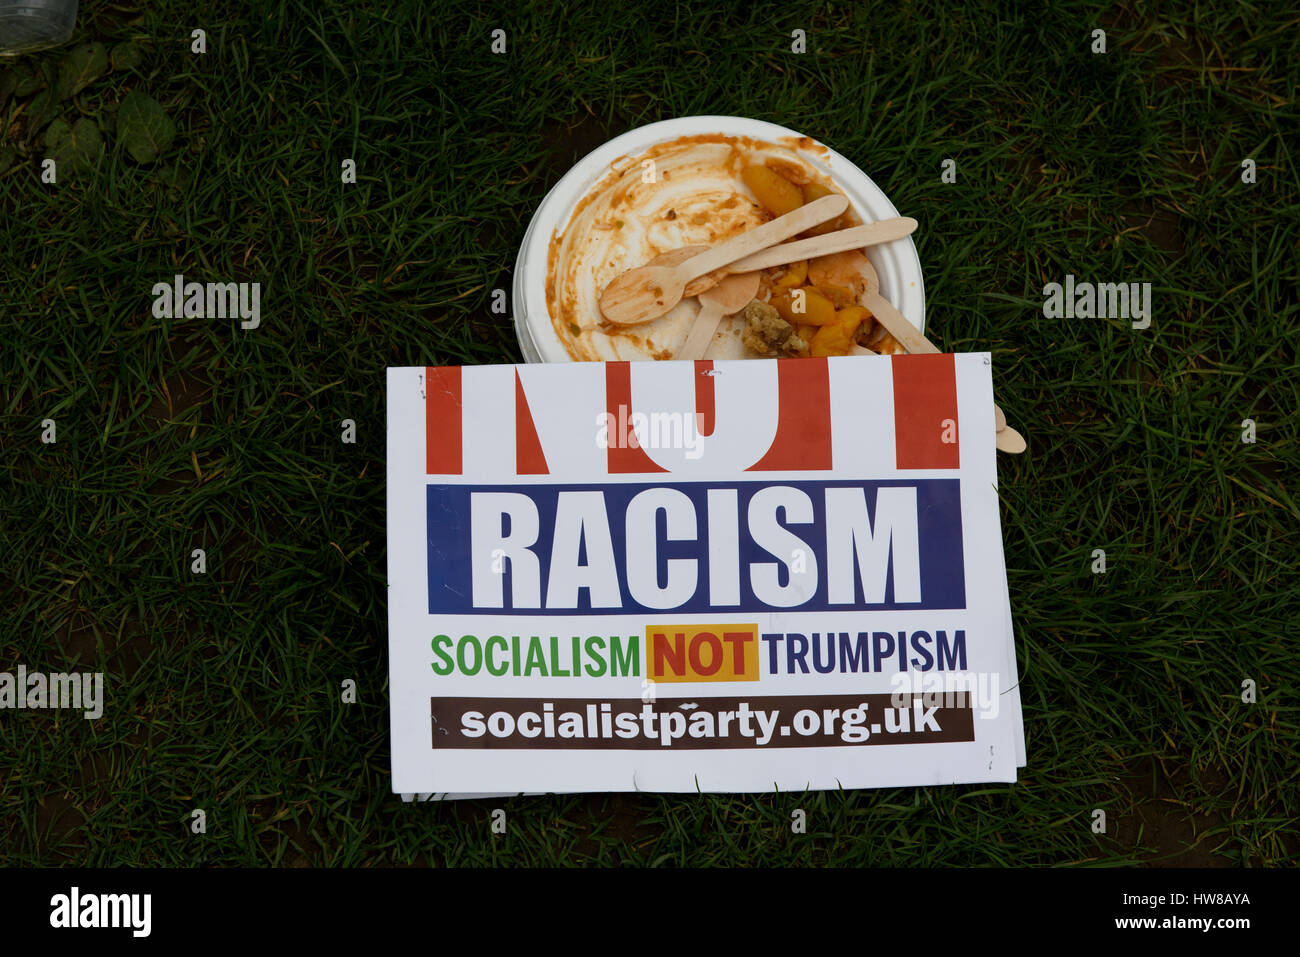 London, UK. 18th March 2017. The newspaper headline 'Not Racism' is lying on the ground during the UN Anti-Racism Day in London, UK. Stock Photo